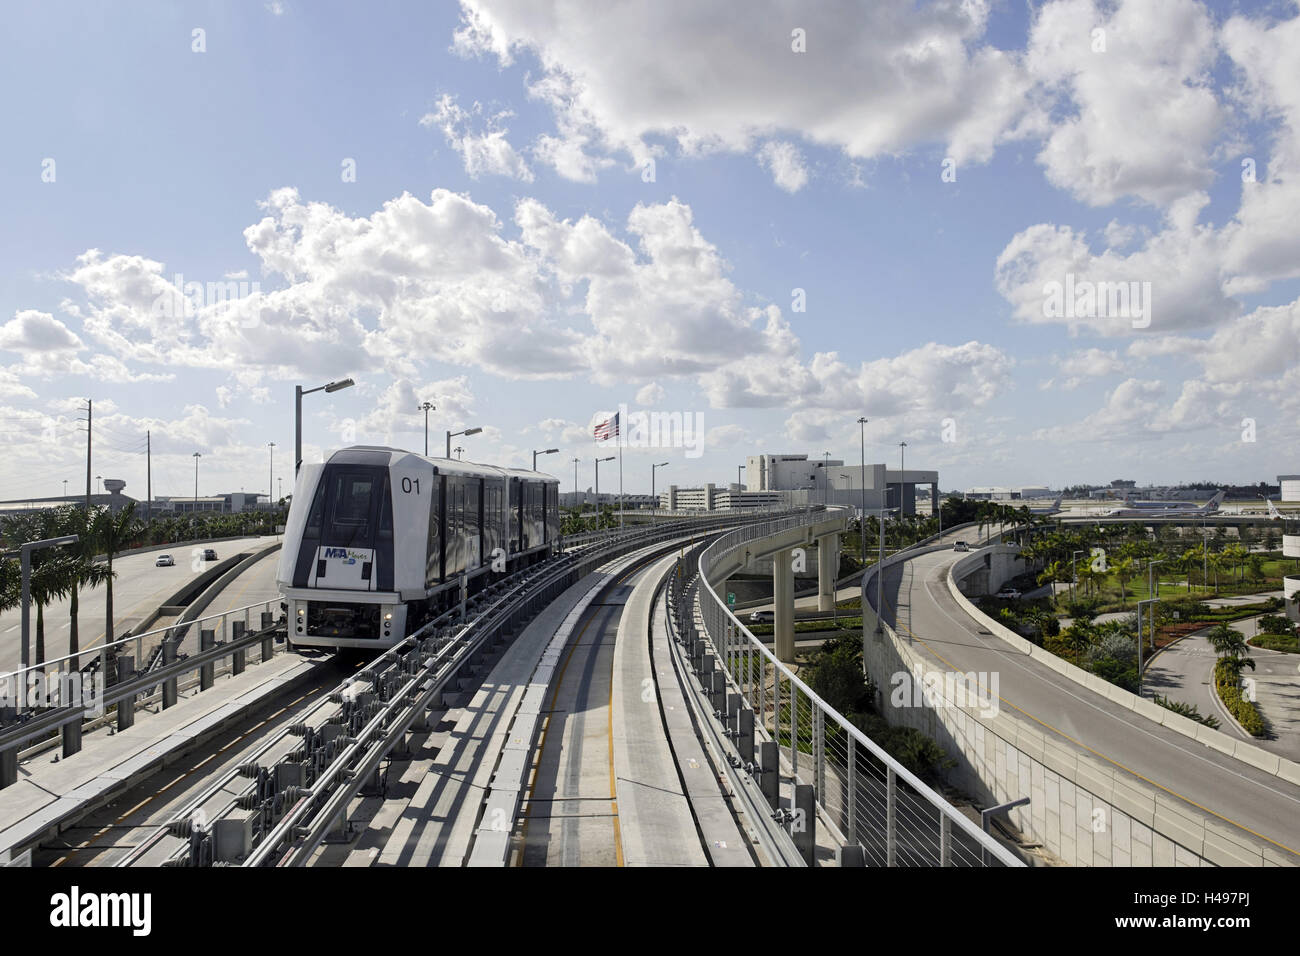 Routing Of Mia Mover Elevated Railway At The Airport Of Miami Miami